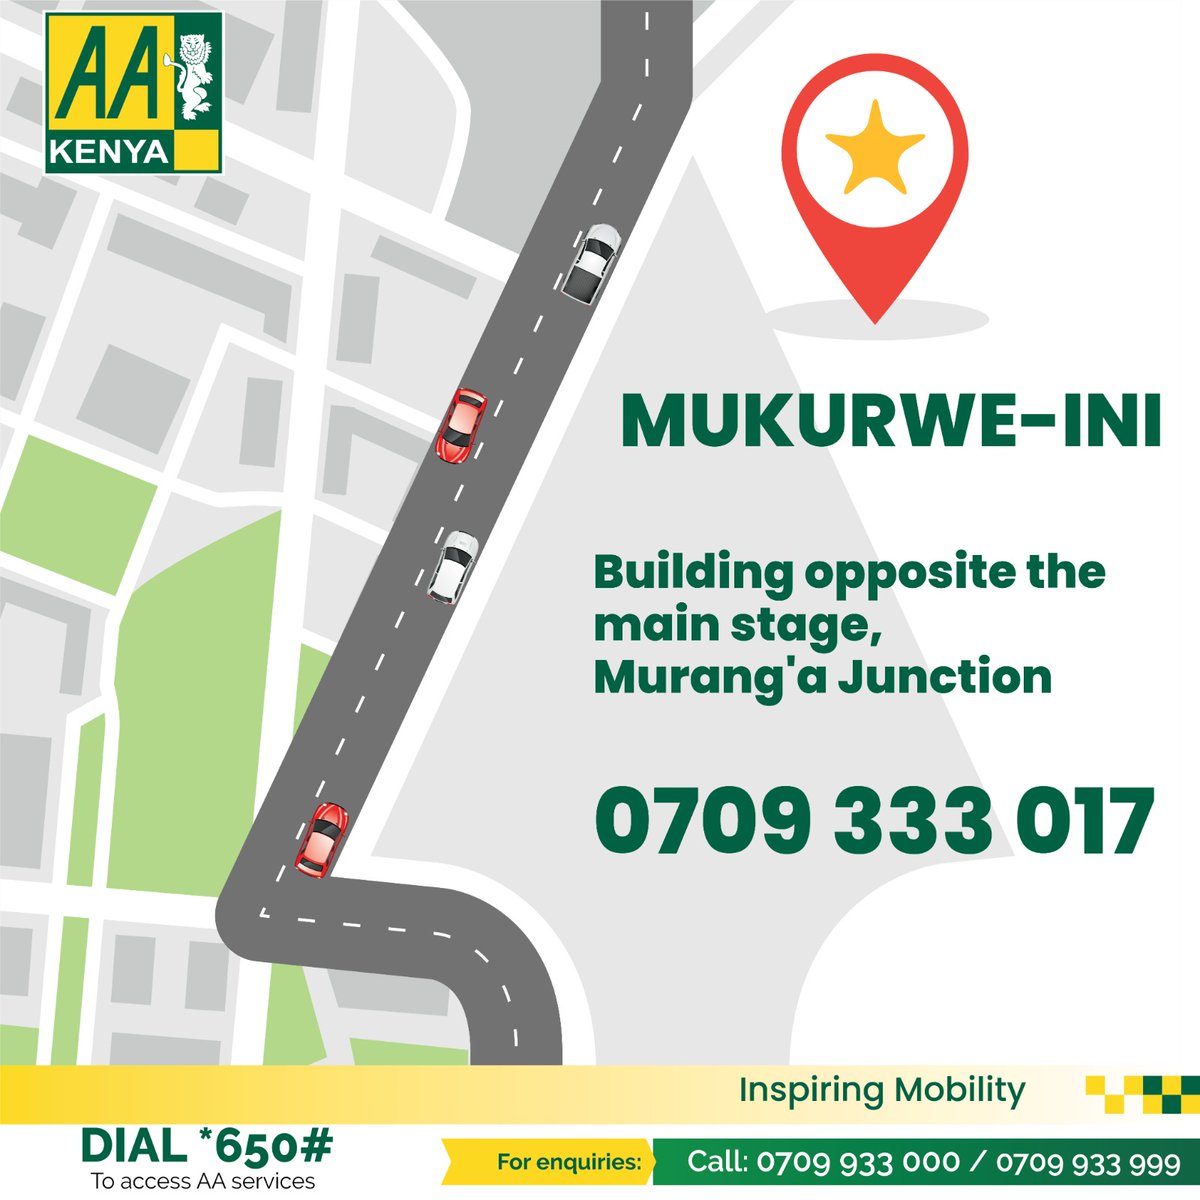 Mukurweini!! Tuko ndani ndani. AA Kenya is pleased to announce that we have a new branch in Mukurweini, the building opposite the main highway entrance stage, Murang’a junction. We are growing to serve you better. For more info call us 0709333017
#AAKenyacares #InspiringMobility